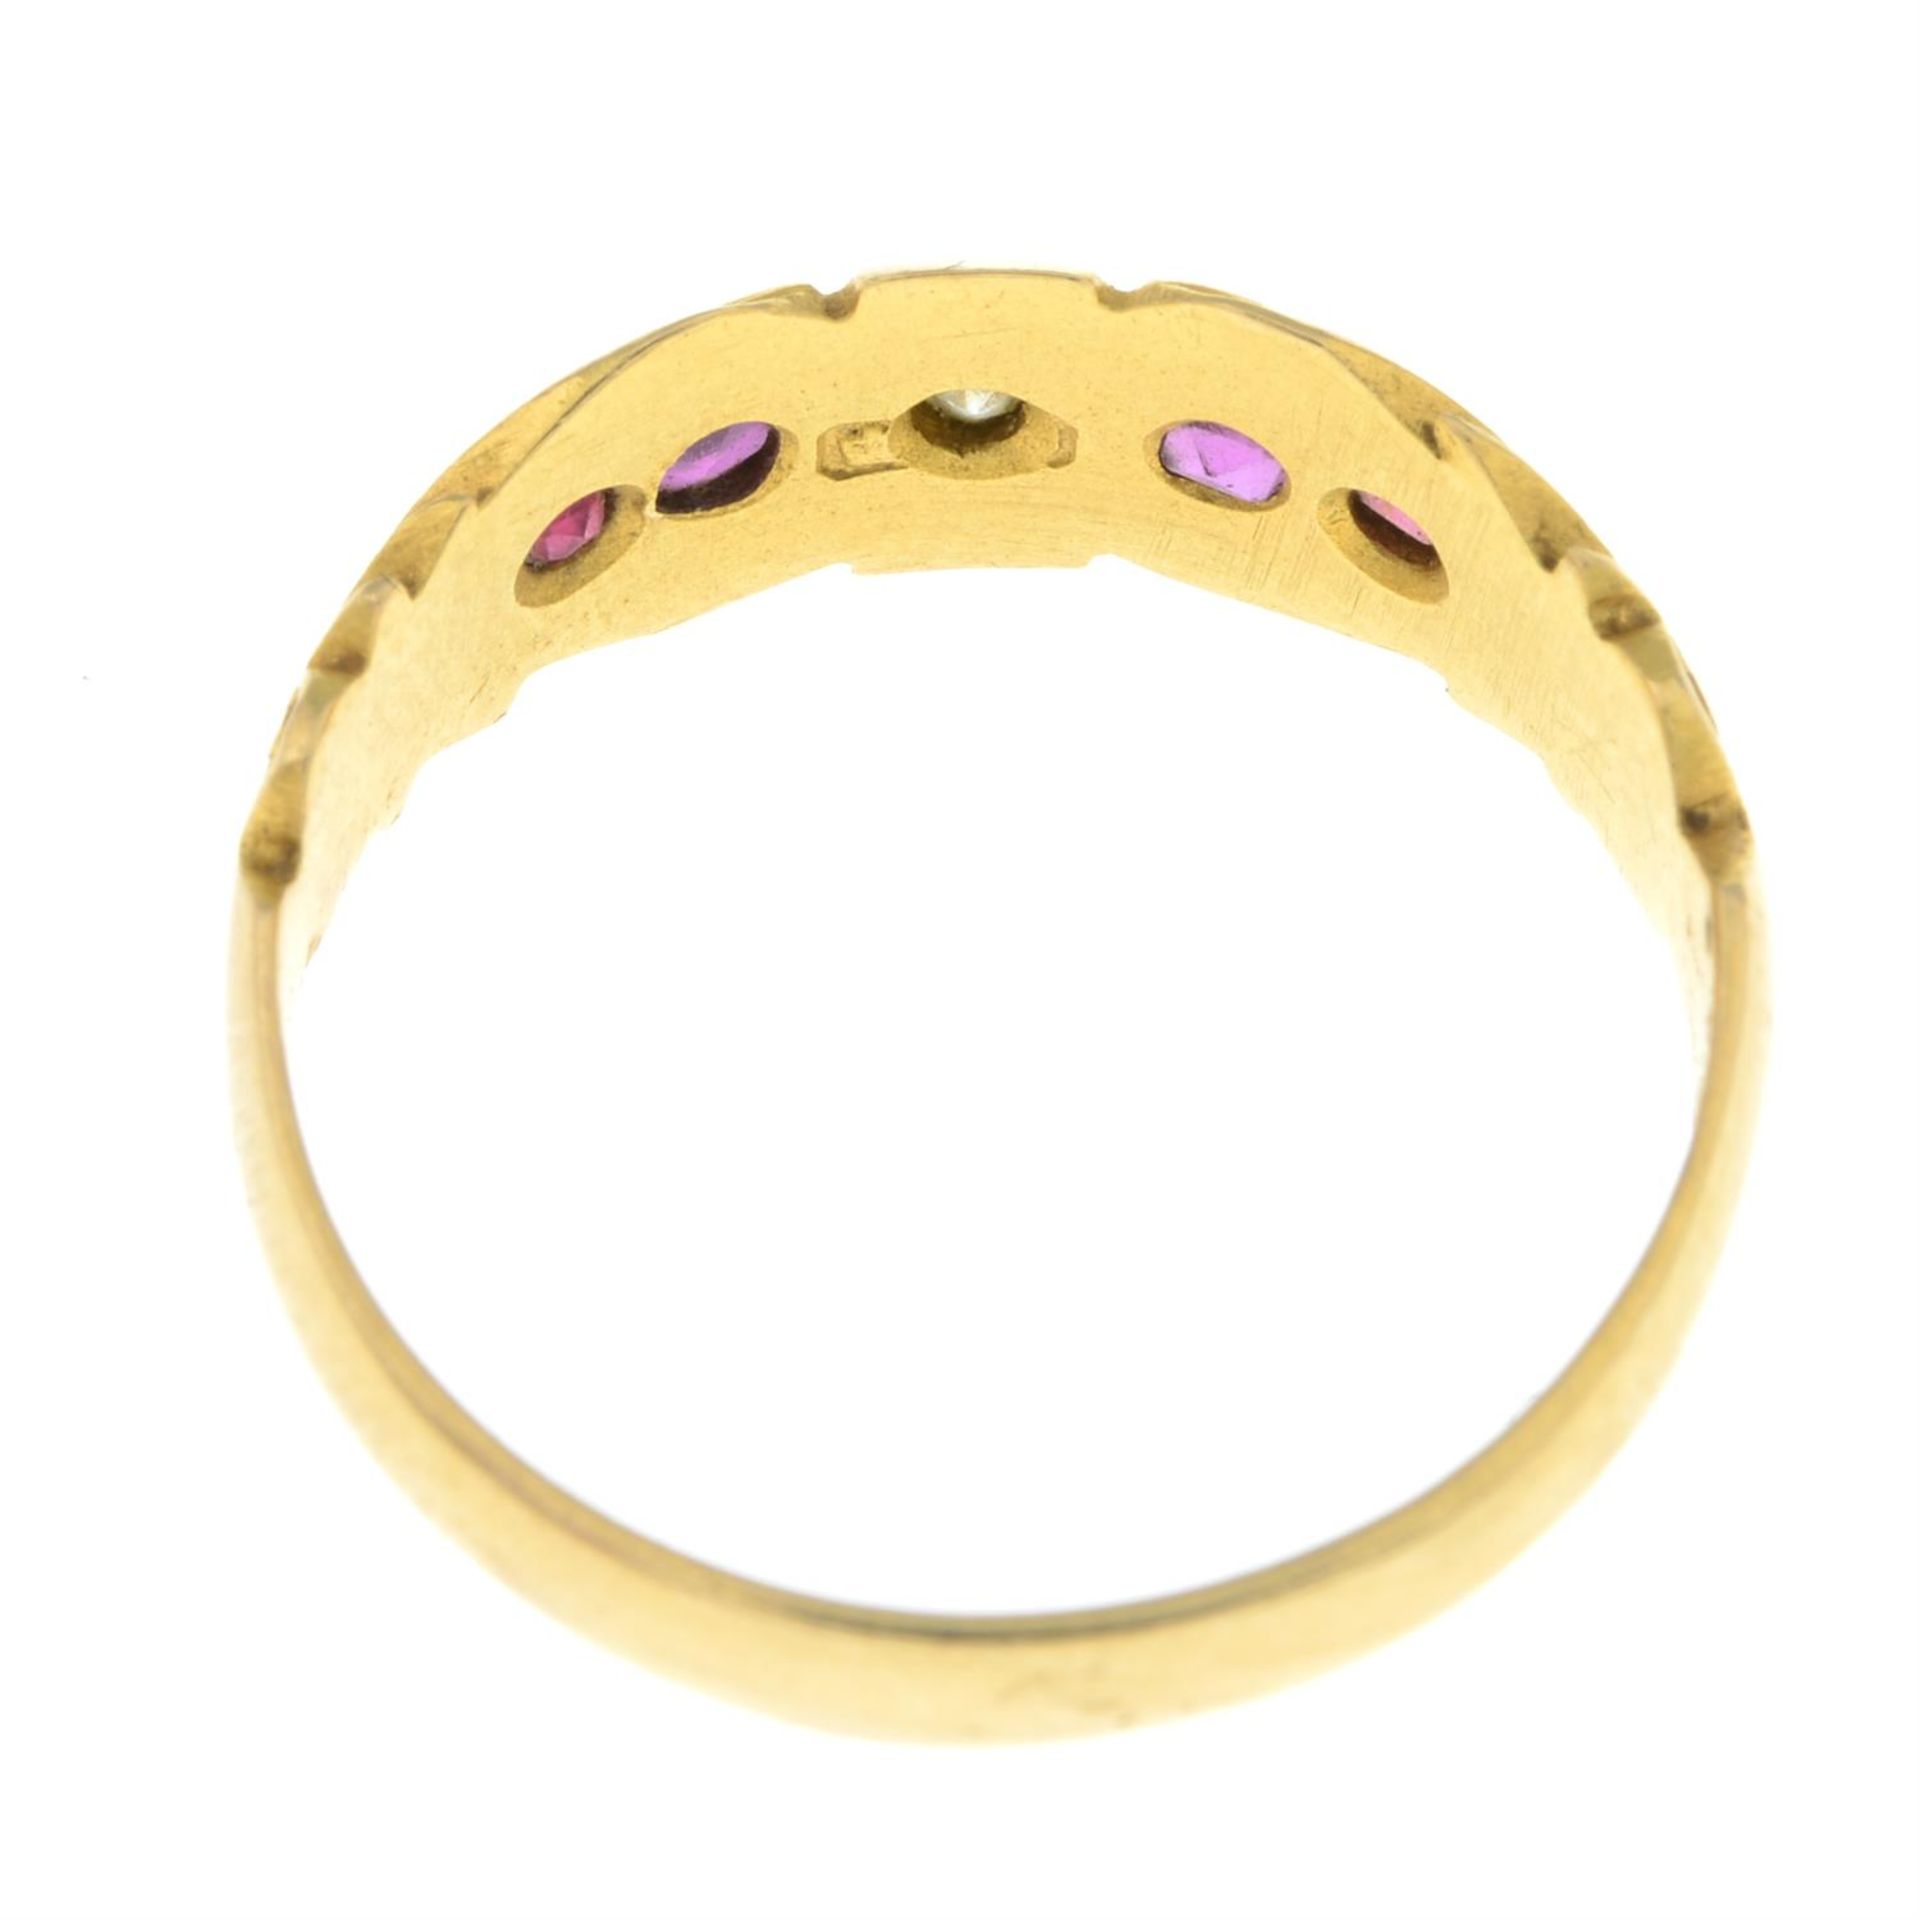 An Edwardian 18ct gold ruby and rose-cut diamond band ring. - Image 2 of 2